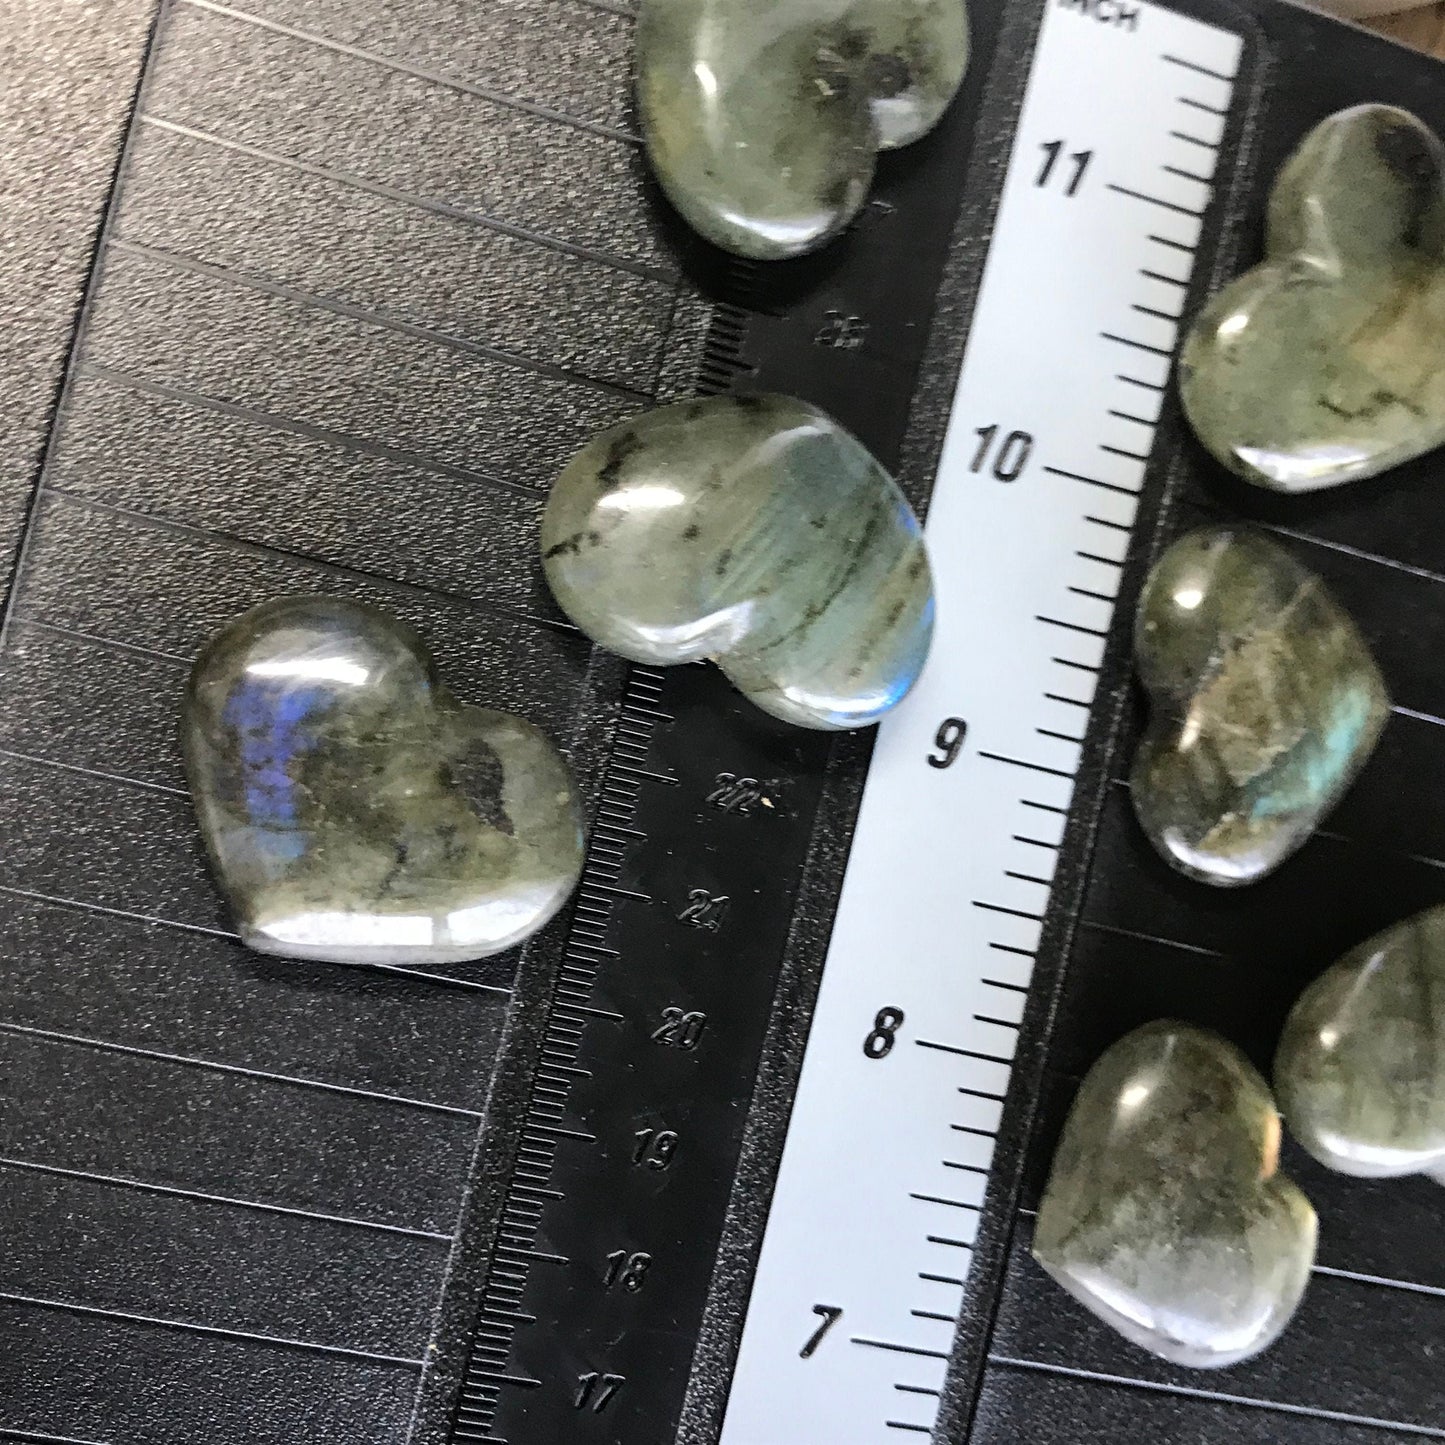 Labradorite Heart, Beautiful Flash (Approx. 1" to 1 1/2" wide) 0522Healing Iridescent Green Feldspar, Stone for Wire Wrapping